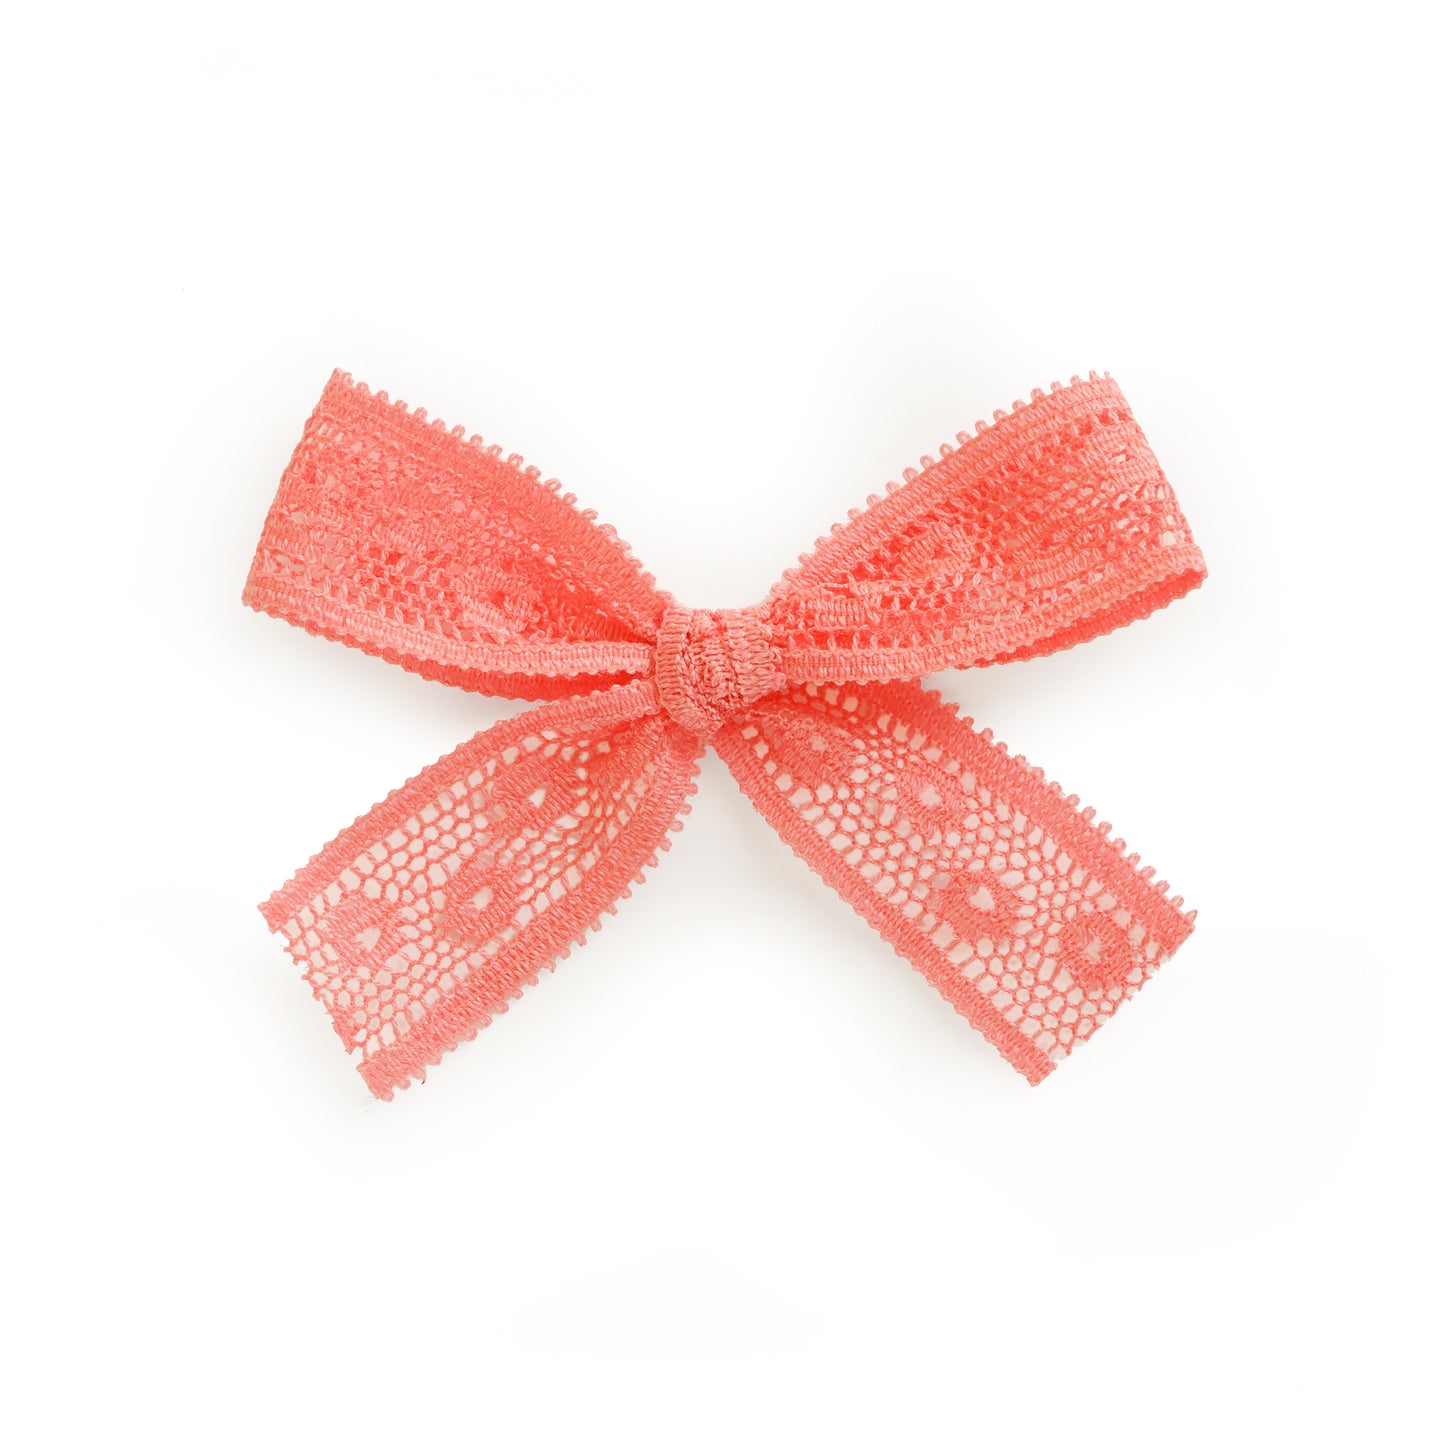 Lace Bow for Babies and Big Girls: Chloe